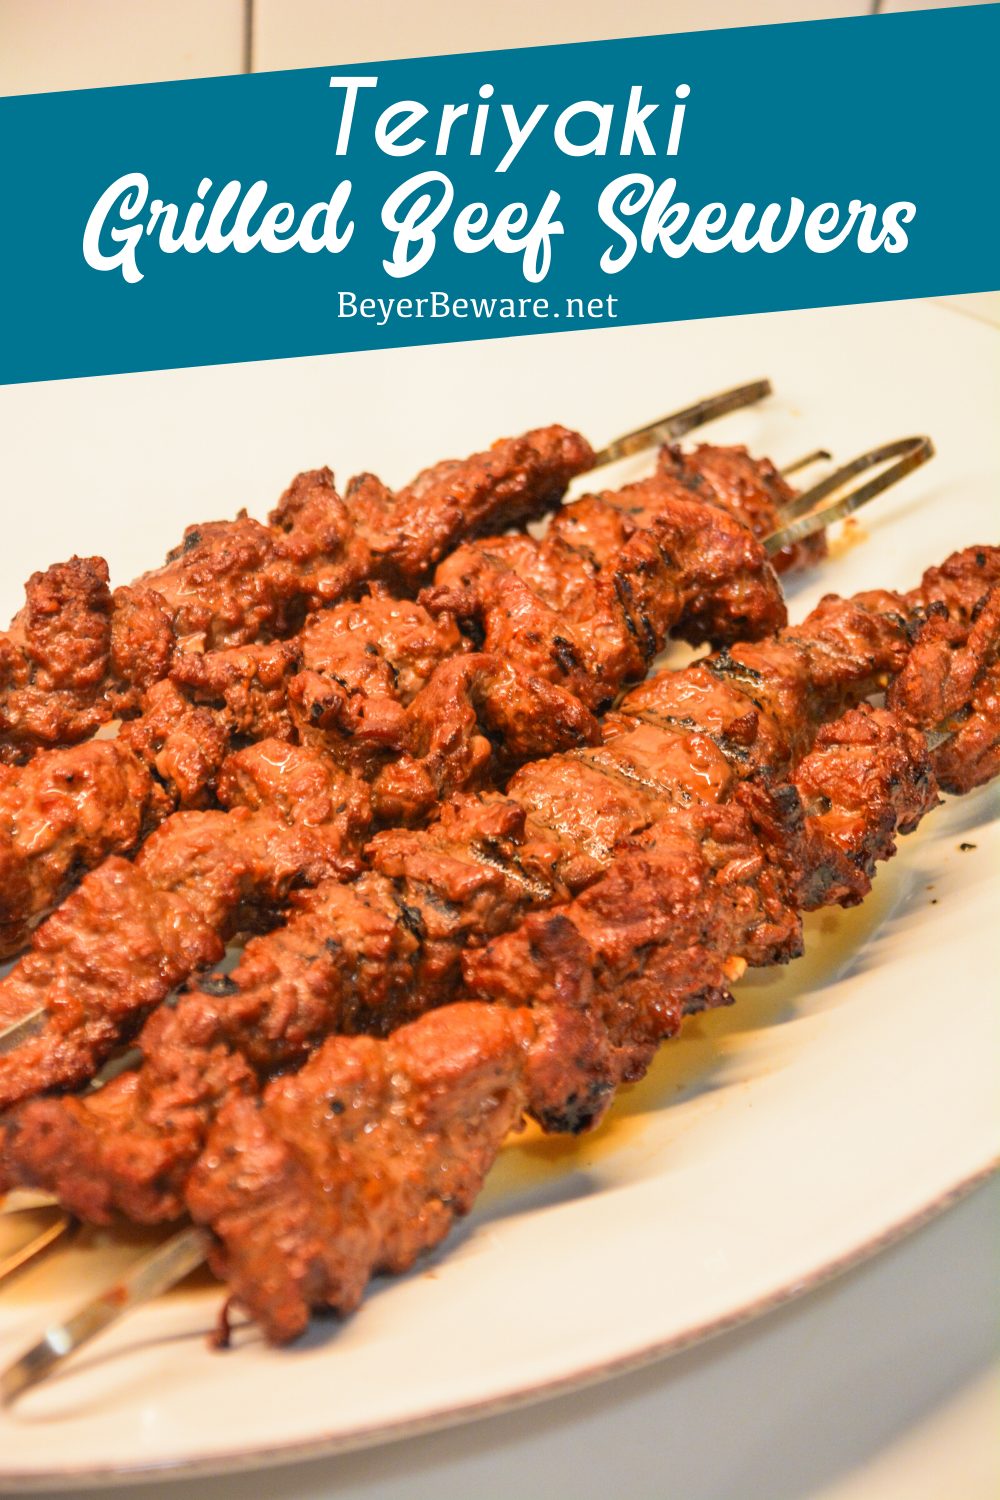 Teriyaki Beef Skewers recipe is a simple to make teriyaki marinade and can use any cut of steak including cube steak or for chicken on a stick.